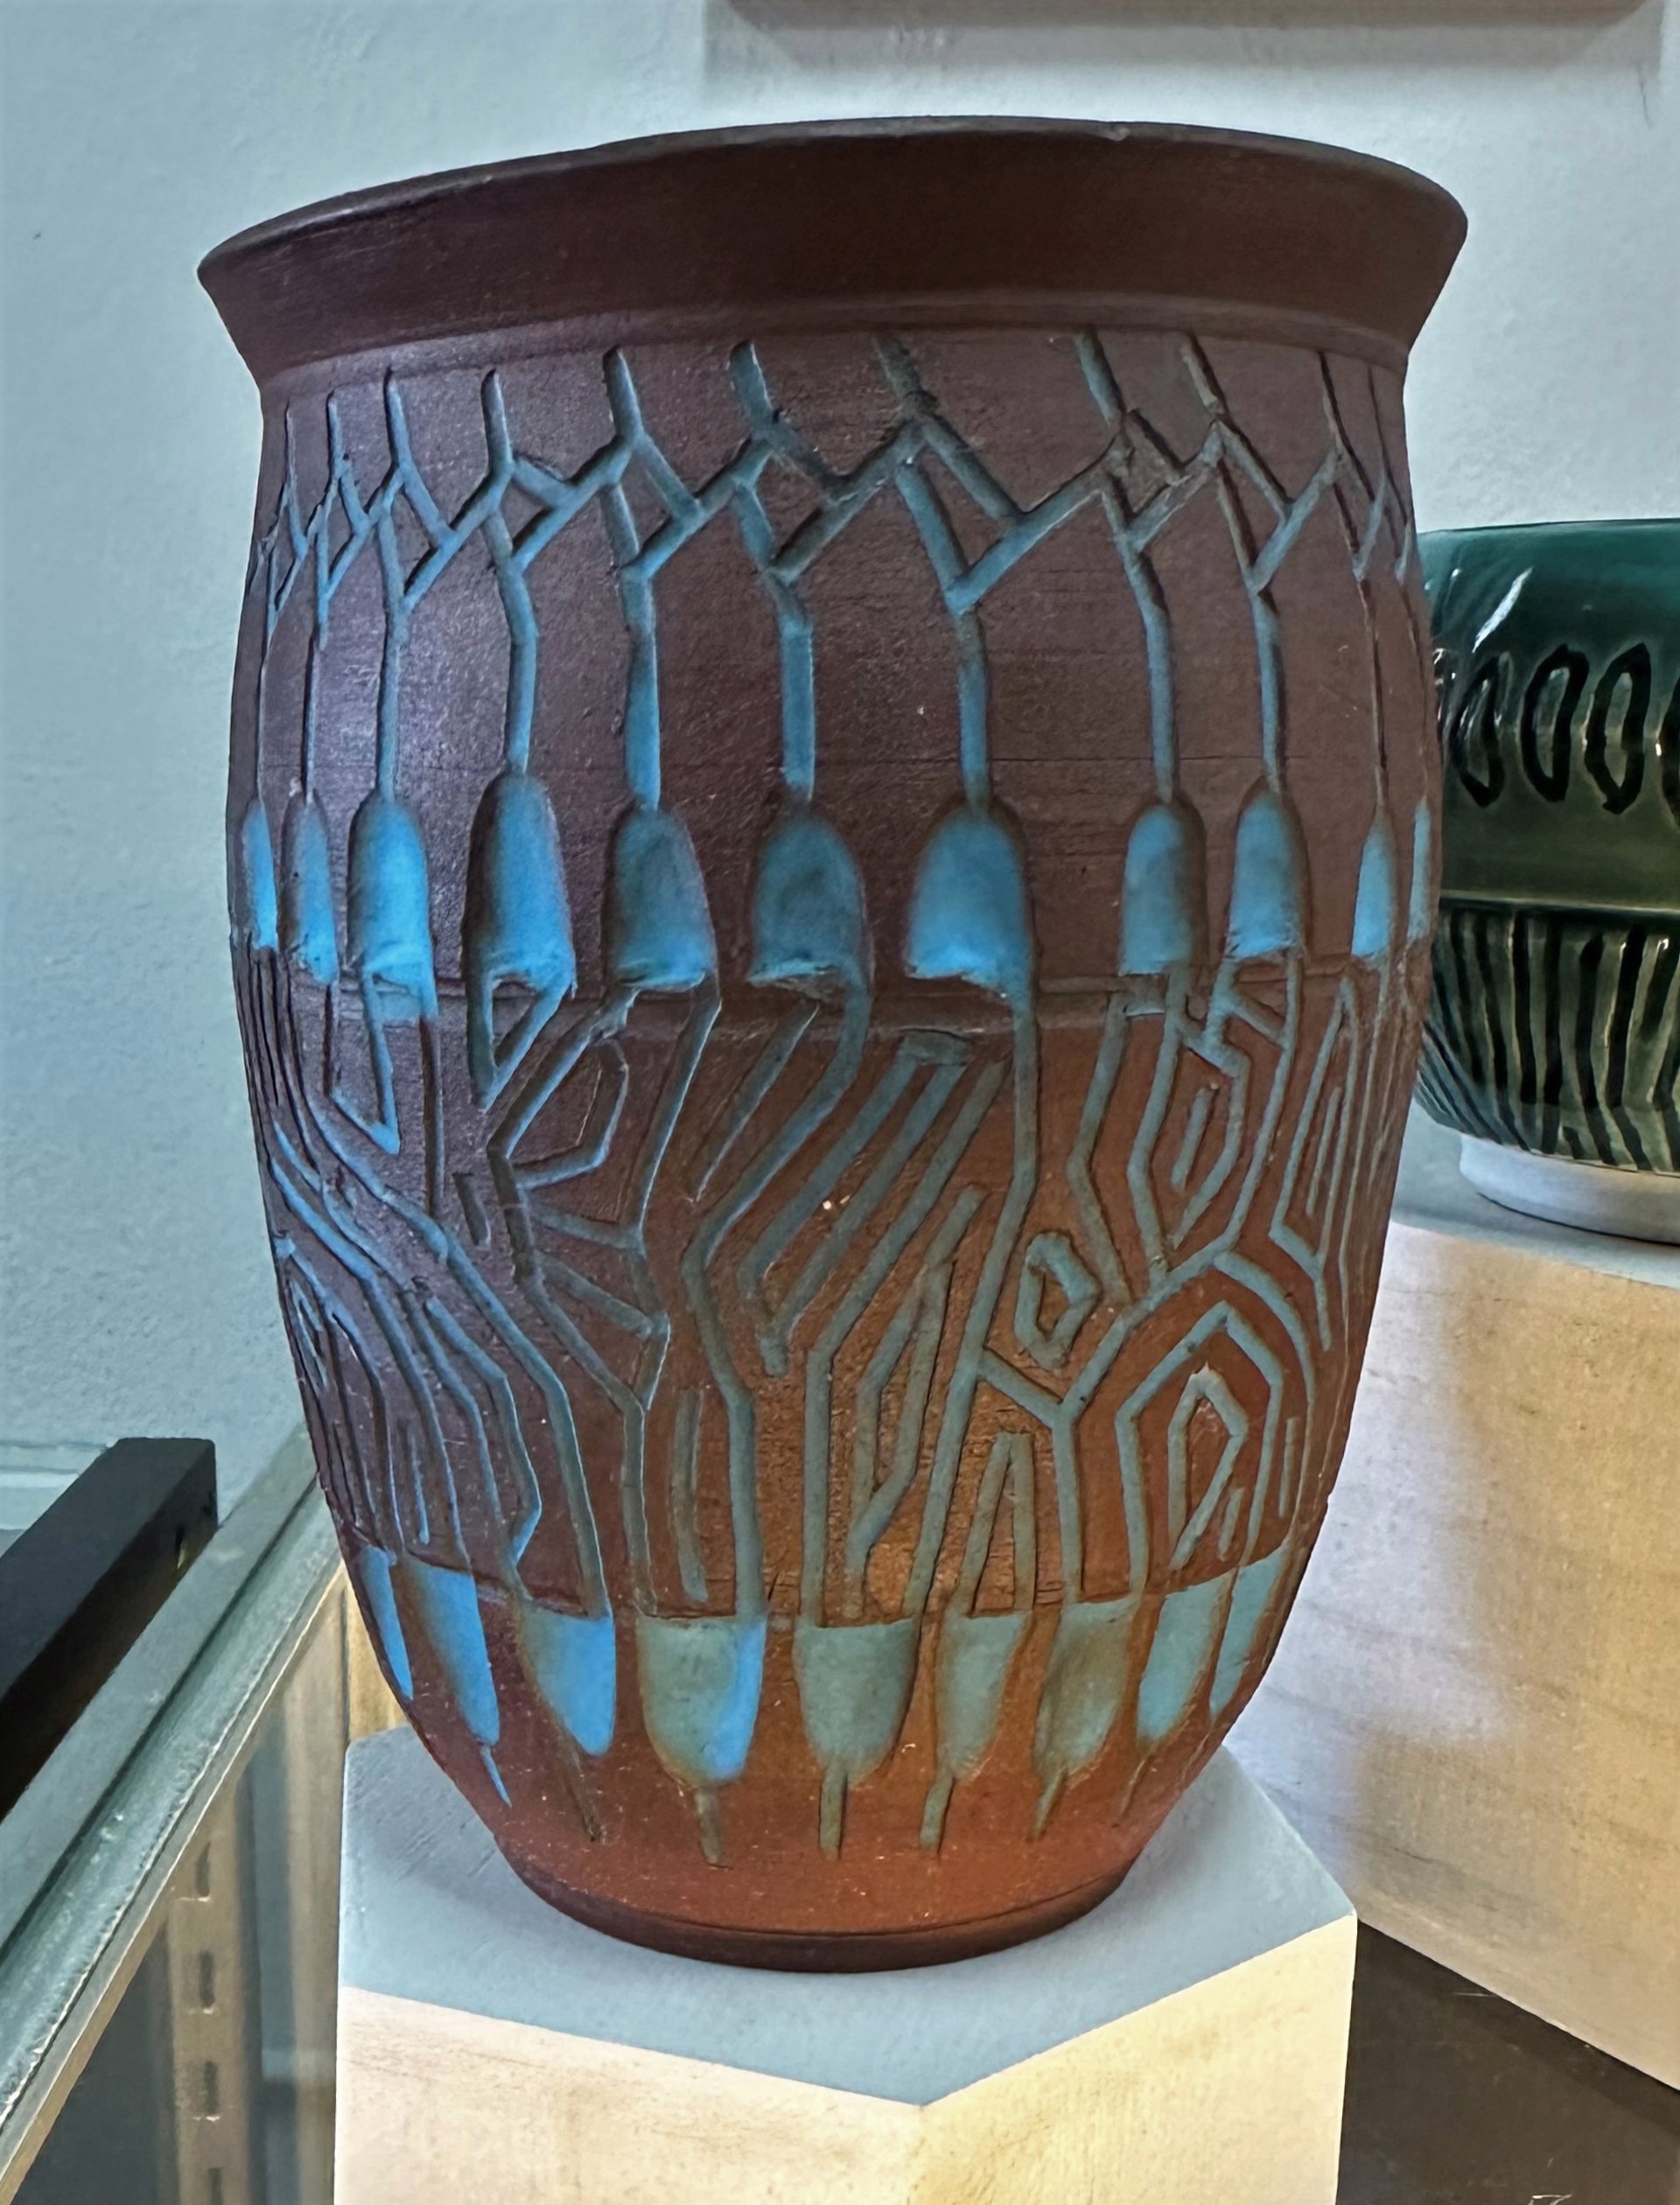 Carved red clay vase inlaid with blue glaze by James Adele Baxter